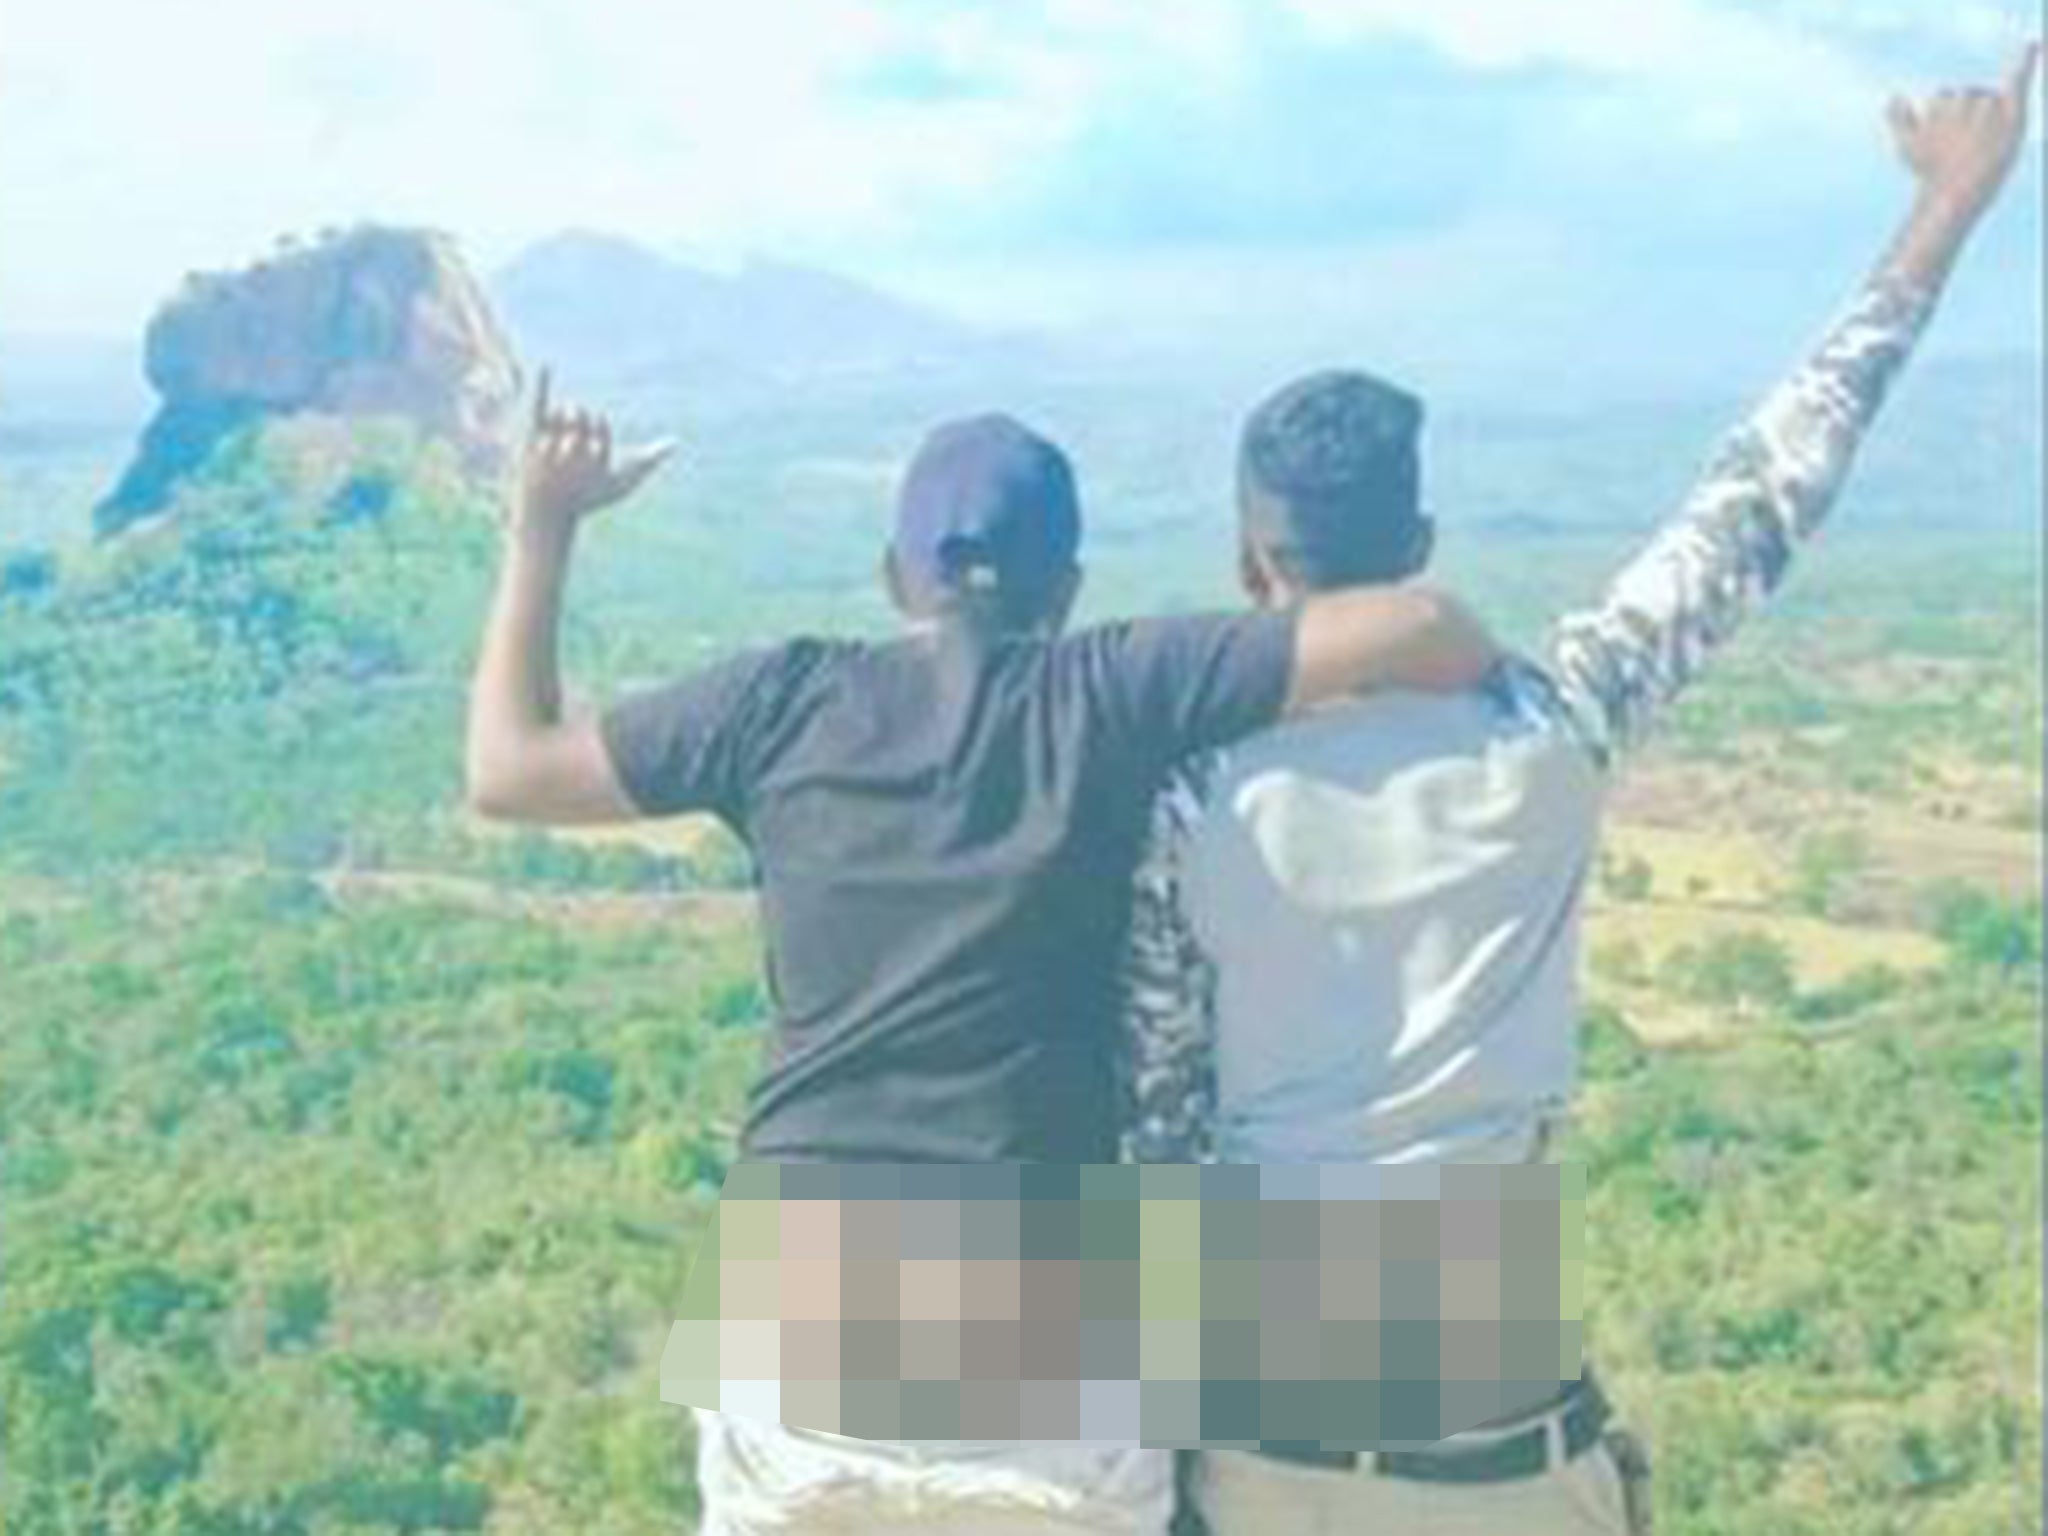 Sri Lanka Raping Hd Sex Vedio - Young men arrested in Sri Lanka for posing with bare backsides at sacred  Buddhist site | The Independent | The Independent